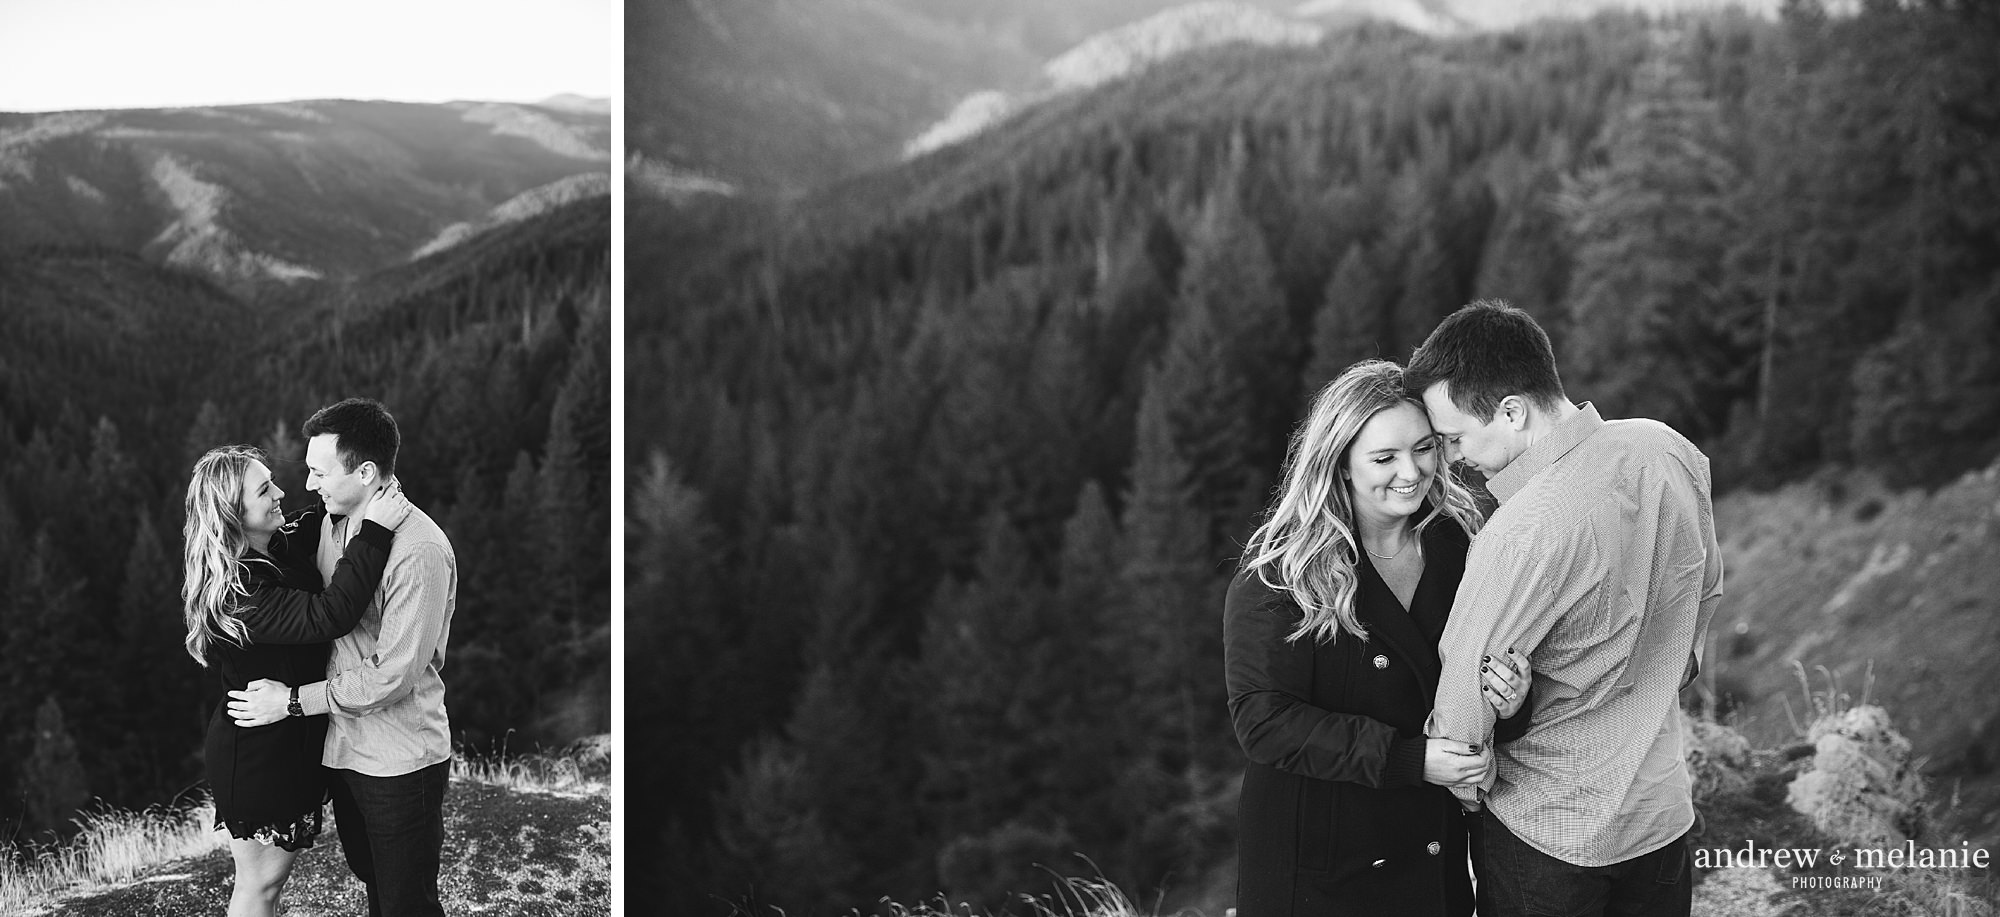 Andrew and Melanie Photography engagement session highlights Nevada City, CA